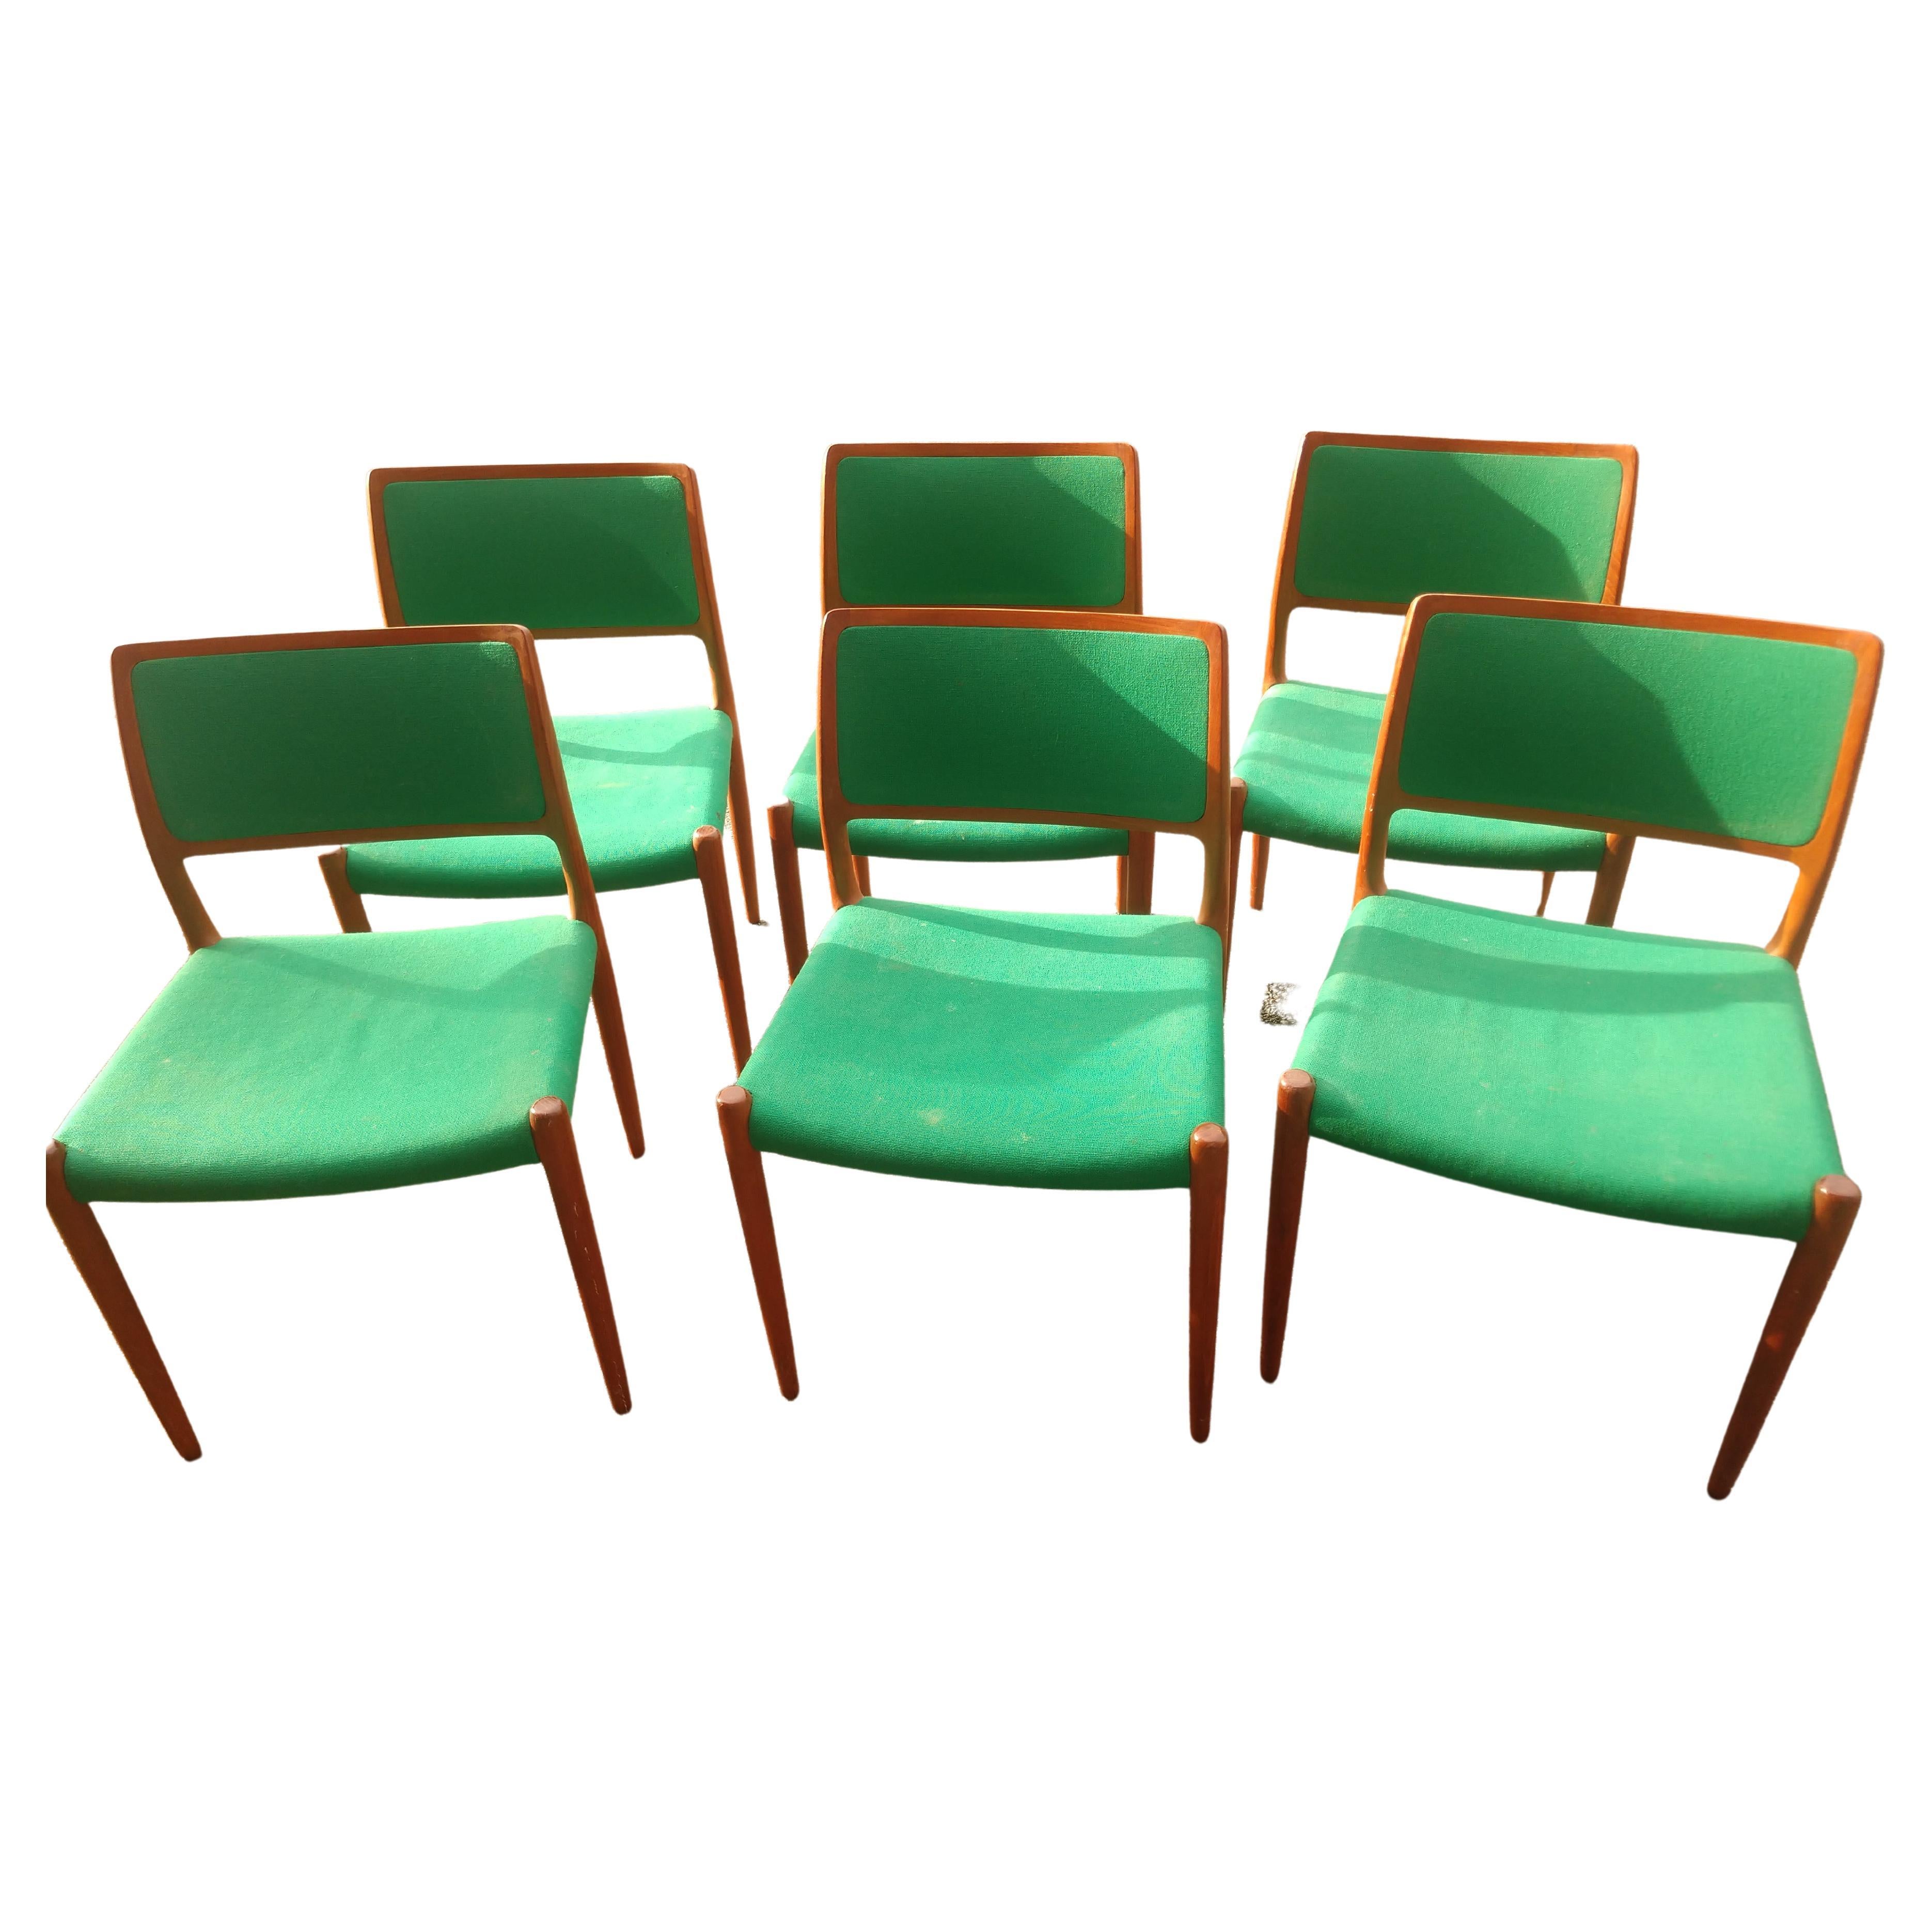 Midcentury Danish Modern Set of 6 Jl Moller Dining Chairs, circa 1970 In Good Condition For Sale In Port Jervis, NY